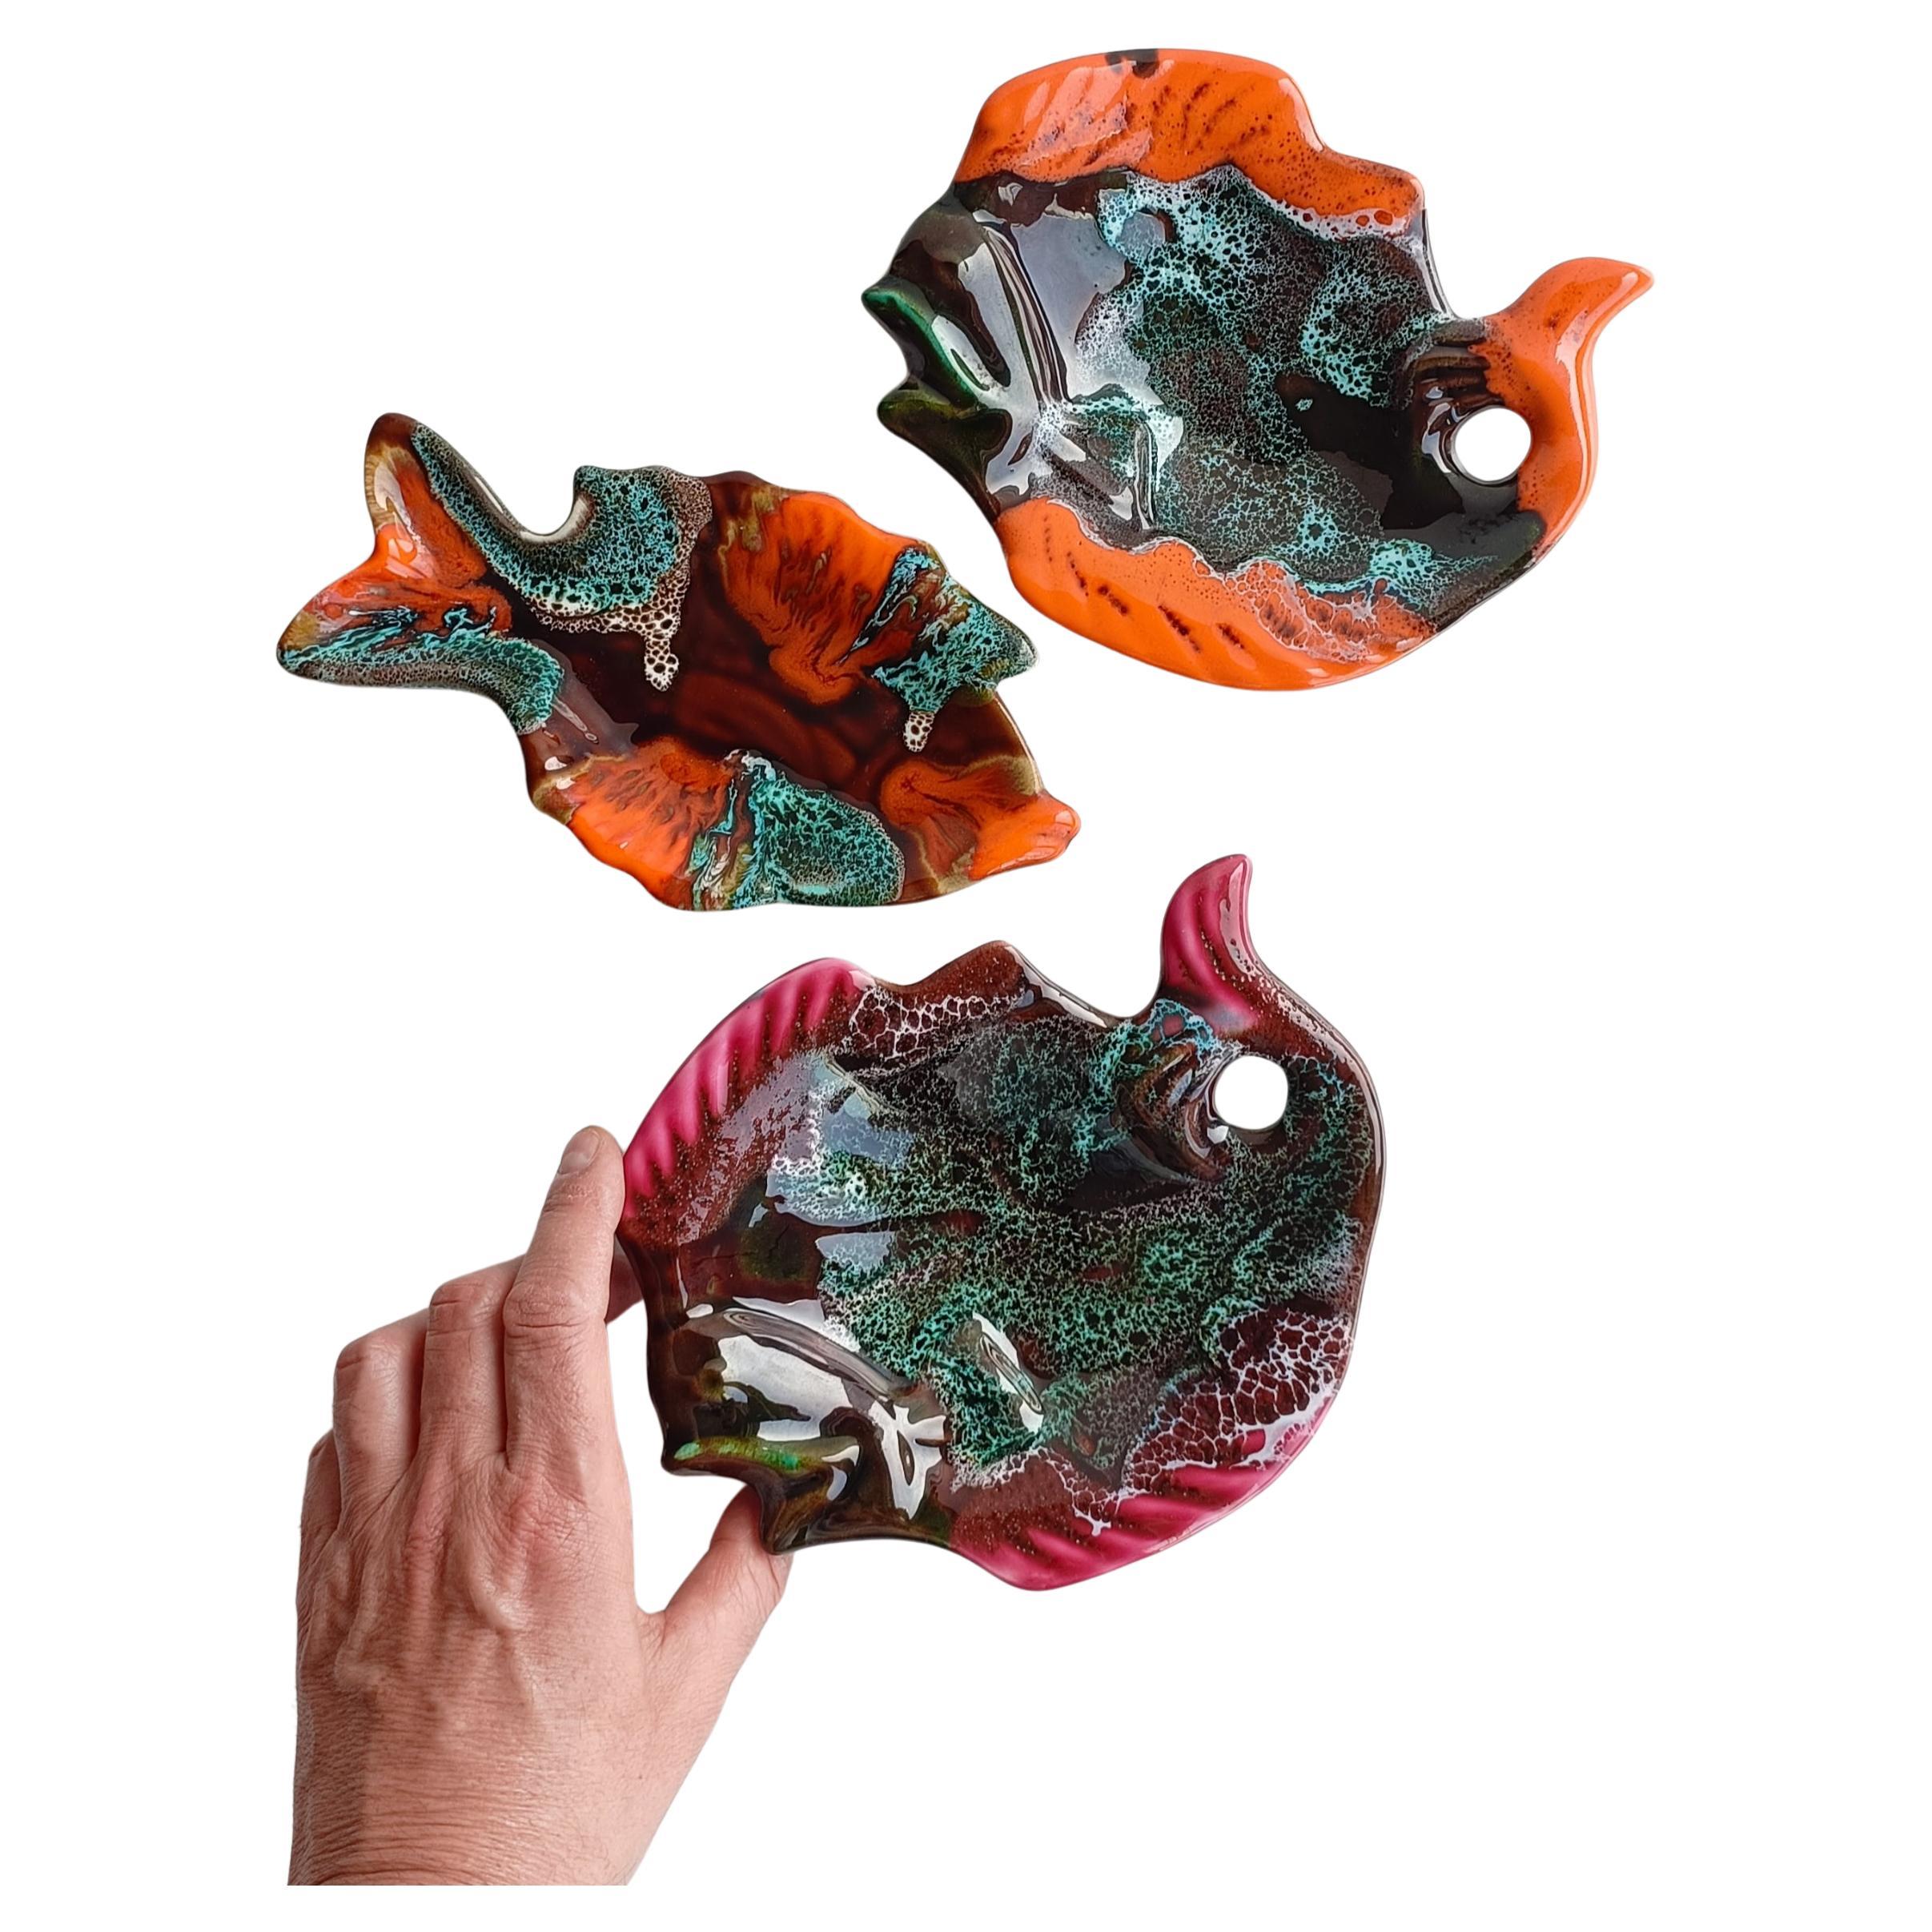 Vintage French Vallauris Signed Fat Lava Ceramic Fish Sculpture-Trays, 1950s For Sale 7